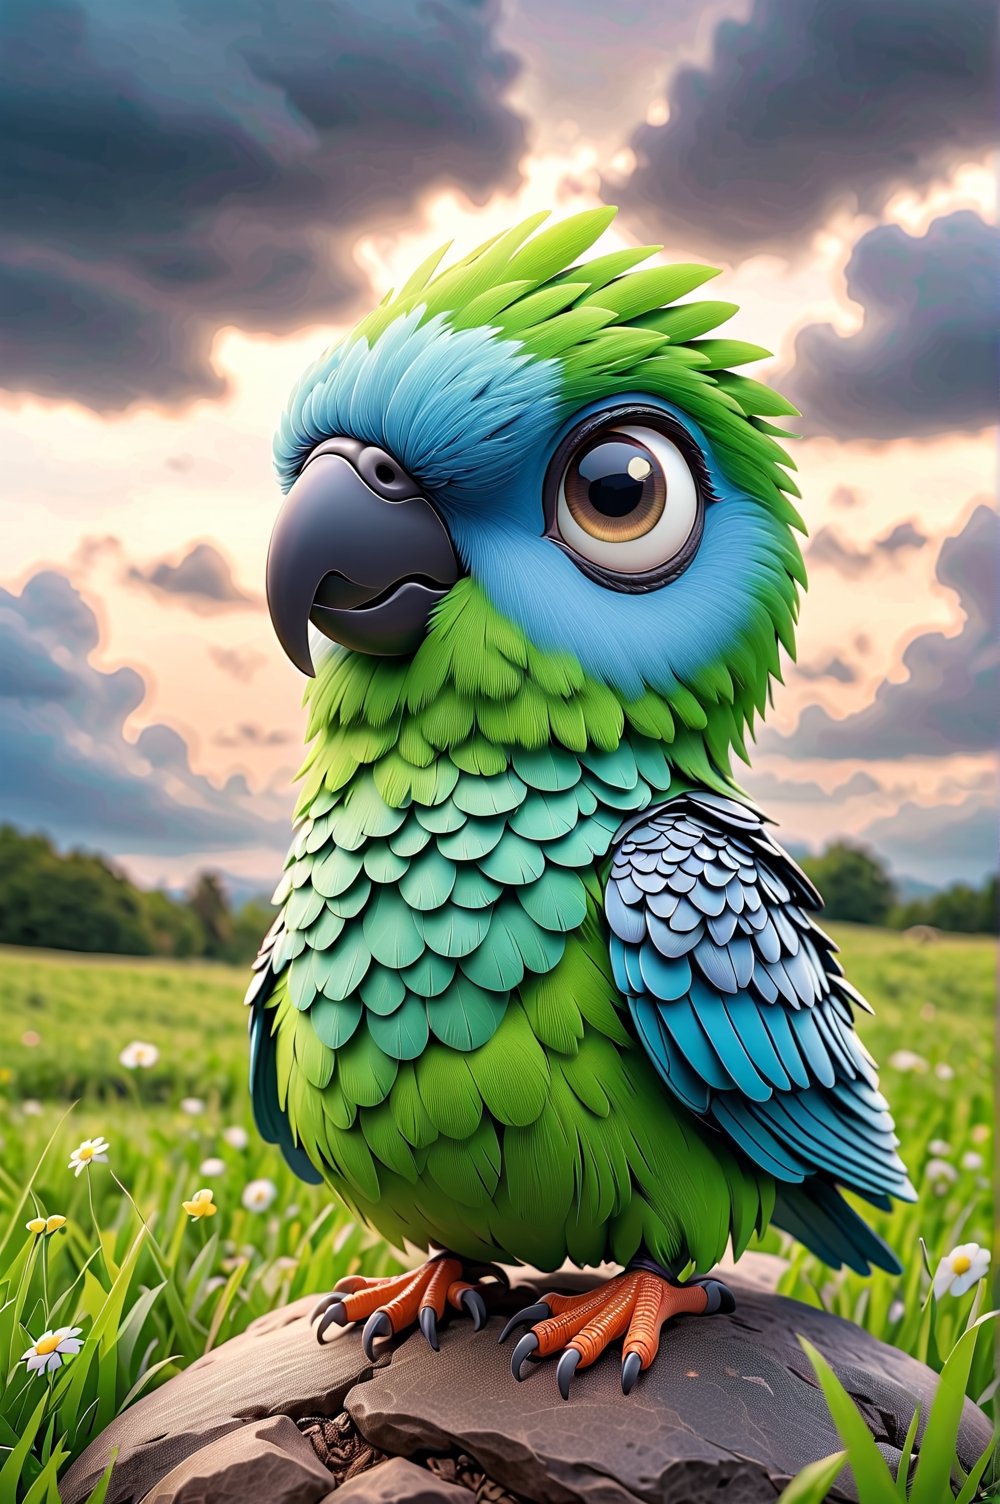 adorable chibi pixar style parrot in the middle of the open field worried about the closed weather, dark clouds, as a storm is brewing with a tornado behind, easter environment, photorealistic, cute, hdr, shaded, lens, focus on the chibi, lighting, hyper-detailed, filigree, big round detailed eyes, detailed, adorable, Jean Baptiste Monk, Carol Buck, Tyler Edlin, Perfect Composition, Beautifully Detailed, Trending on Artstation, 8K Fine Art Photography, Photorealistic Conceptual Art, Volumetric Cinematic Perfect Light, Gloss and natural contrasts, Chiaroscuro, Award-winning photography, Masterpieces, Digital Art, rafael, caravaggio, greg rutkowski, belle, bexinski, giger, children's fairy tale style, bright and vivid colors without saturation.